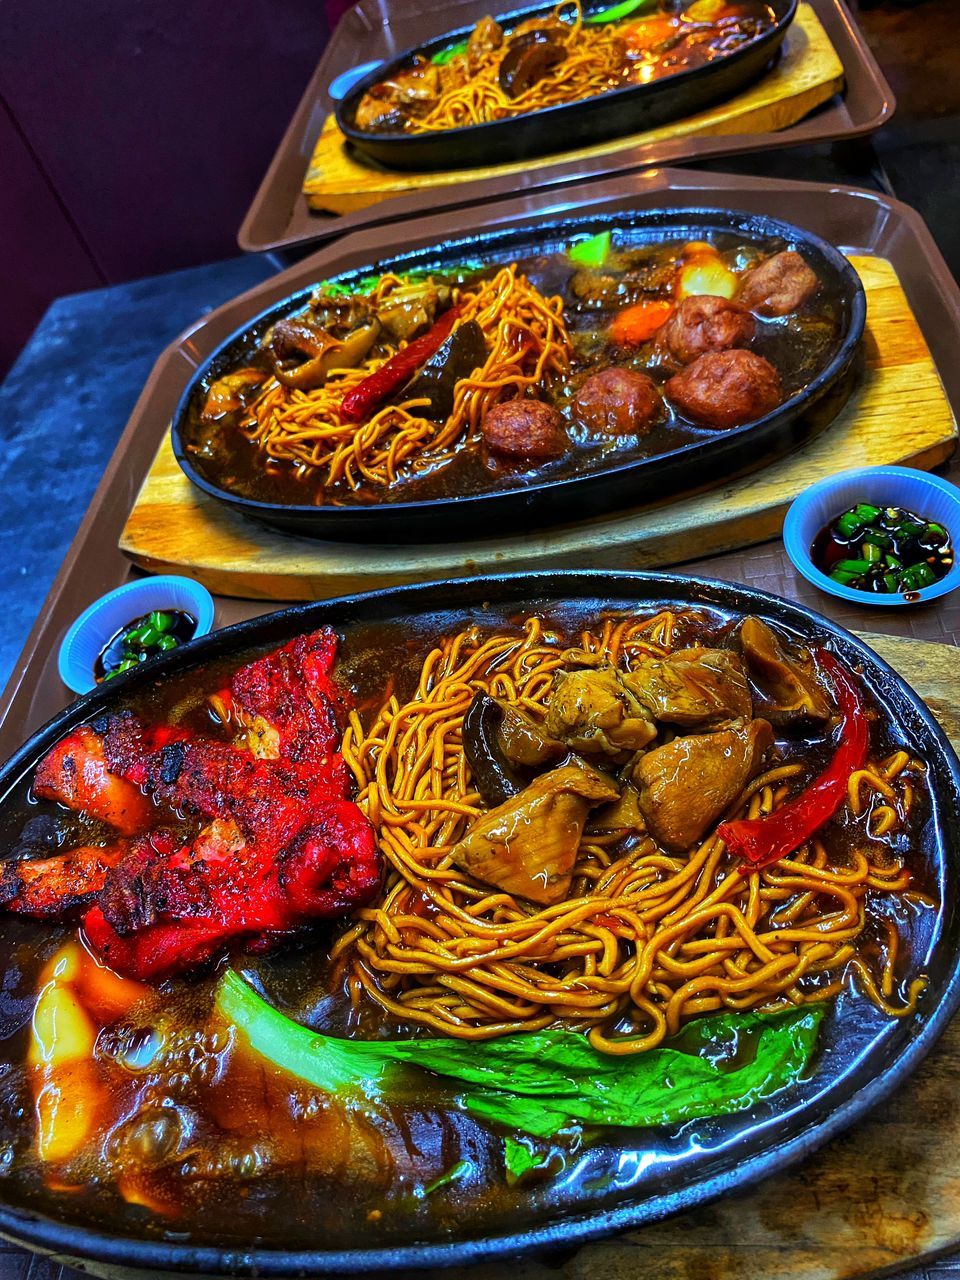 HOT PLATE SIZZLING